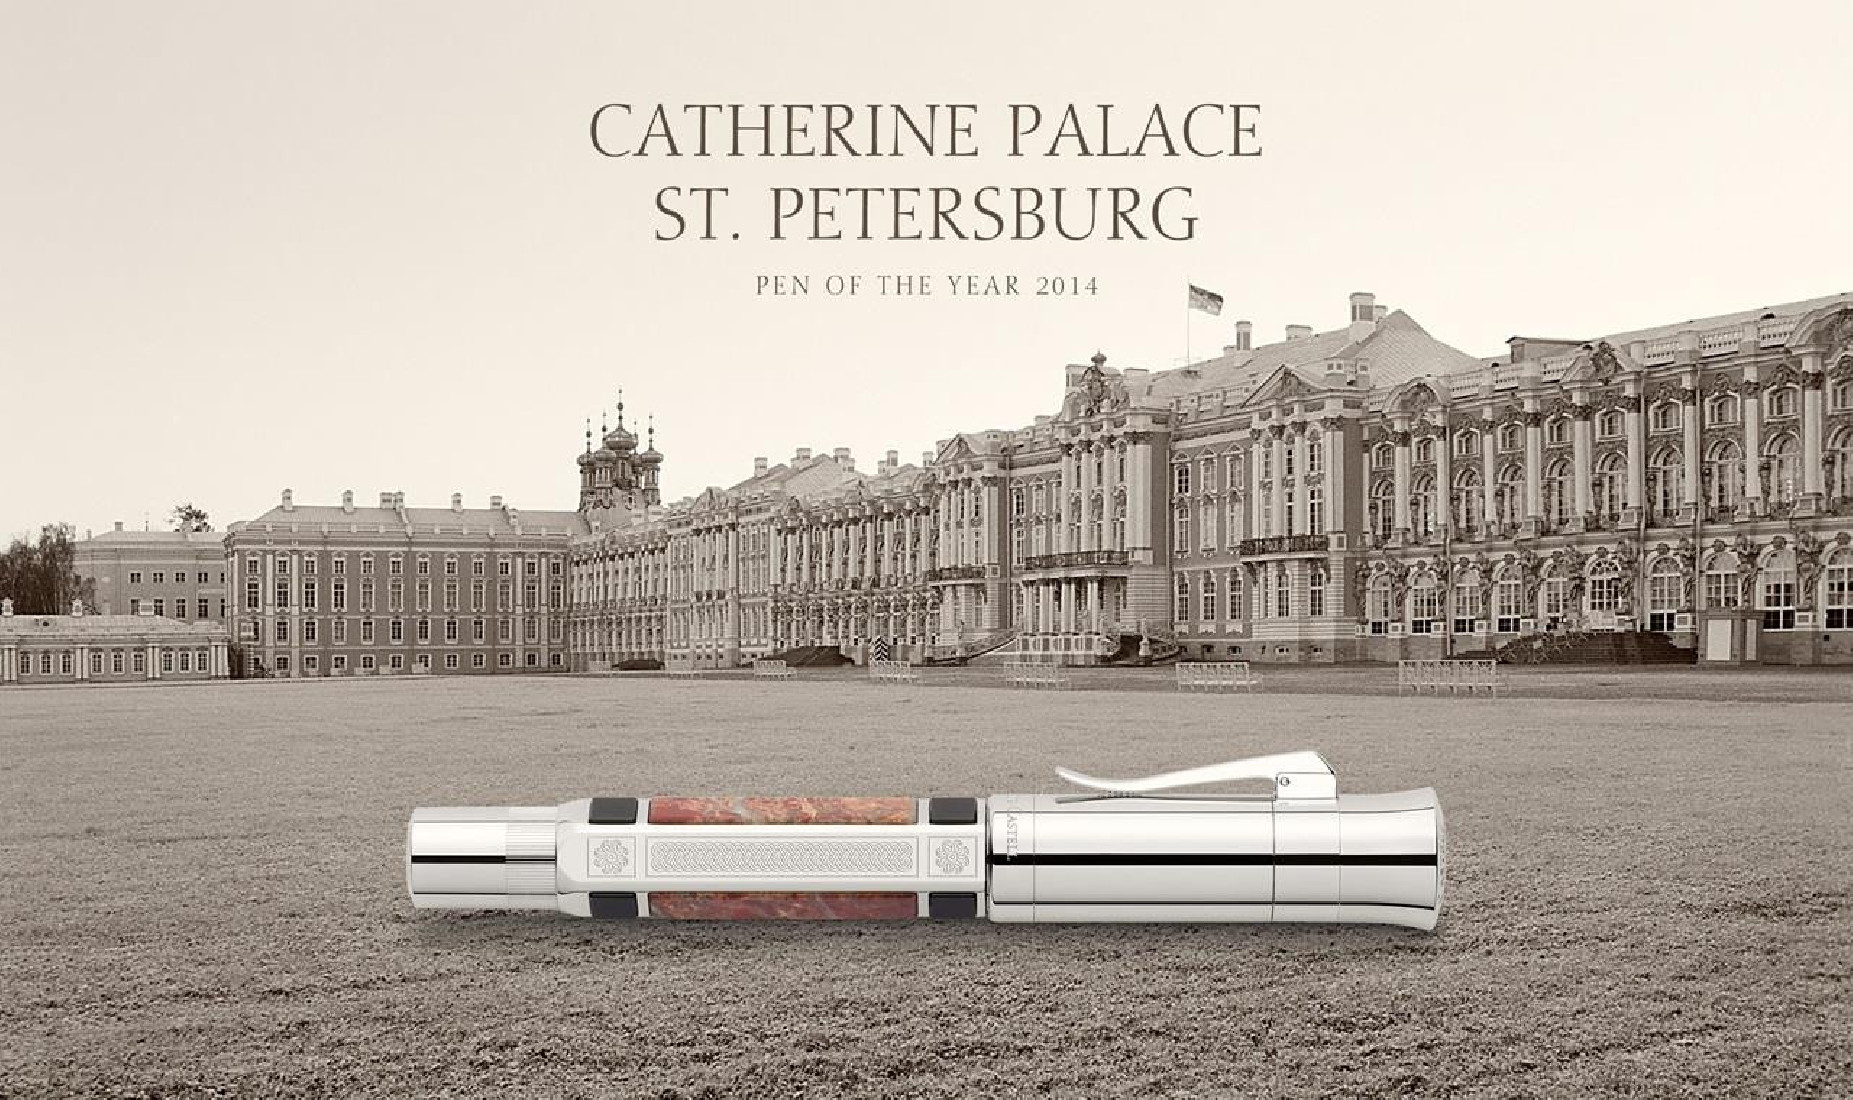 Graf Von Faber Castell pen of the year 2014 platinum plater Rollerball Catherine Palace St Petersburg